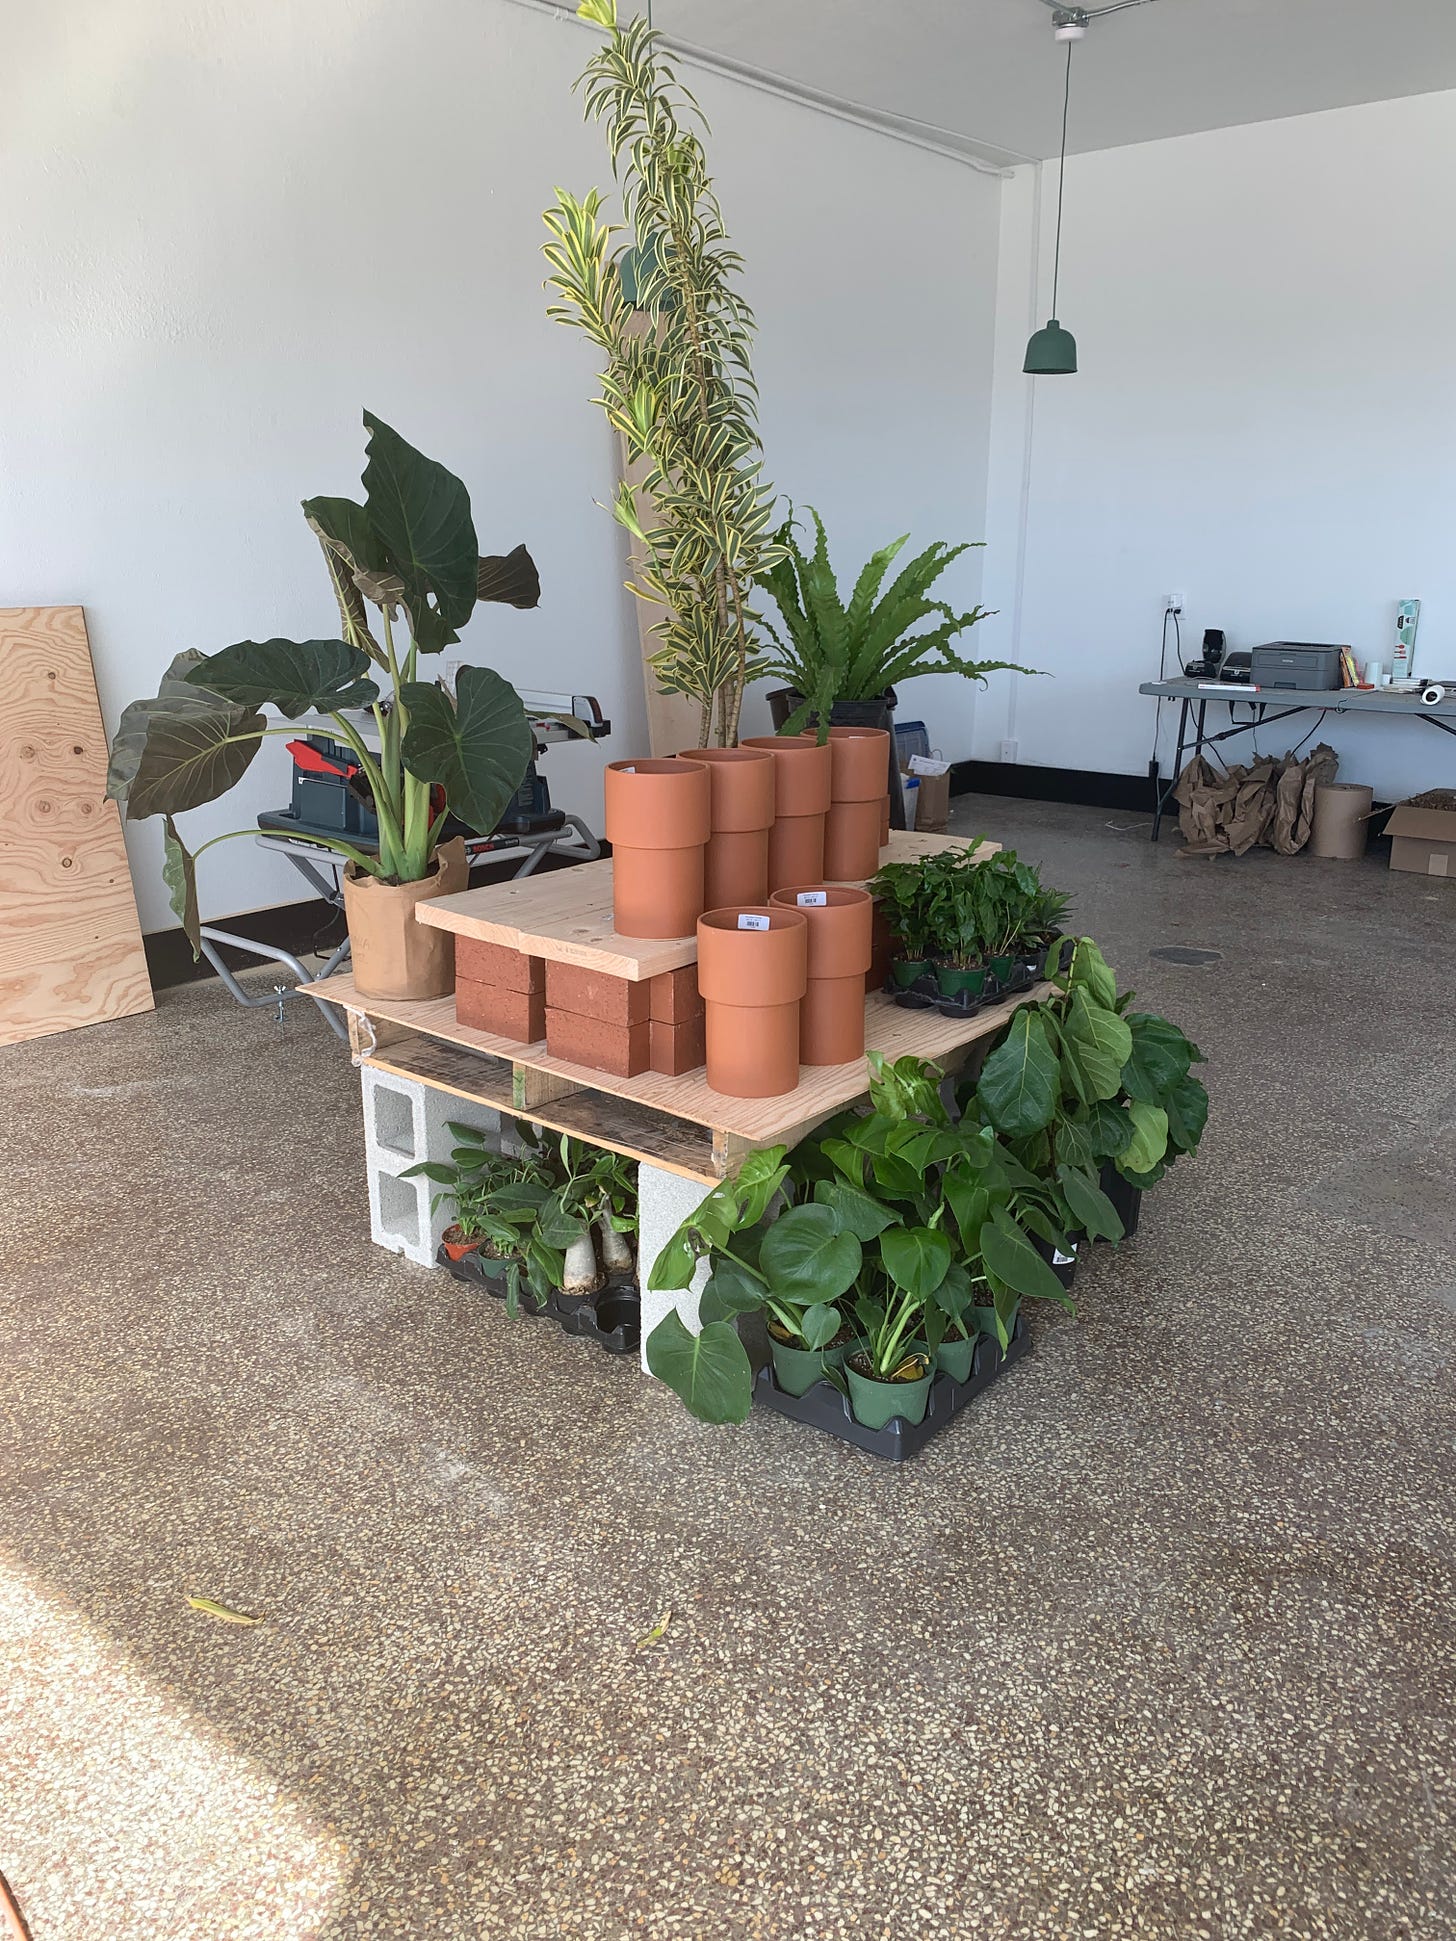 plants and pots on top of a display made out of a wood pallet on cinder blocks